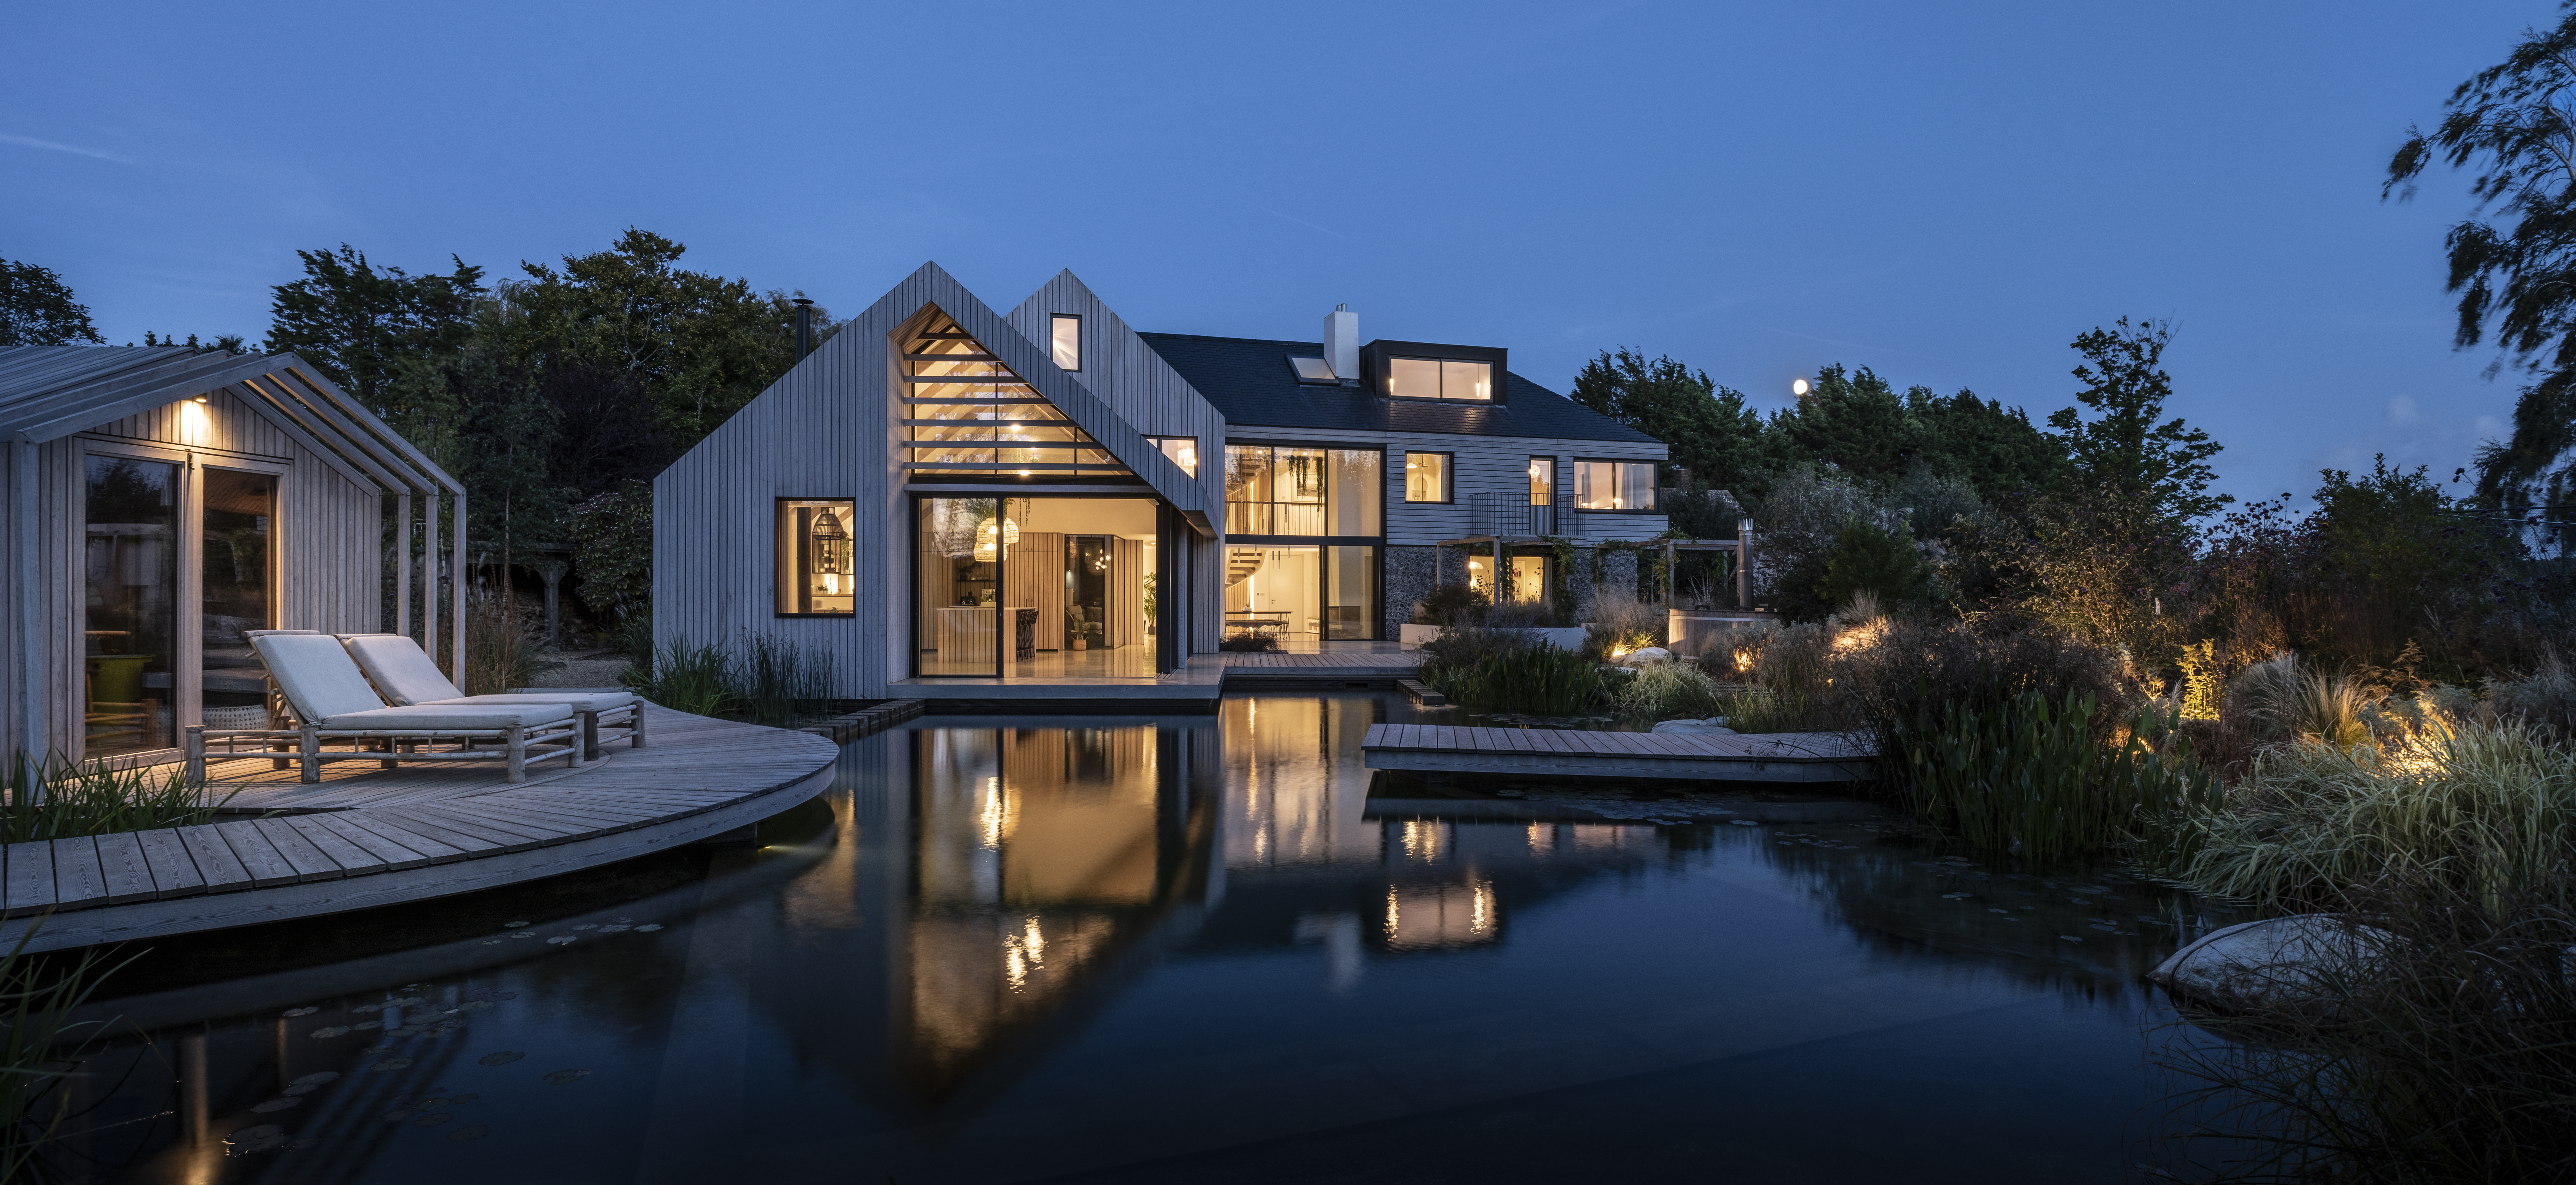 From a Natural Pool to Natural Slate: Cupa 12 selected for Beautiful GRAND DESIGNS PROJECT